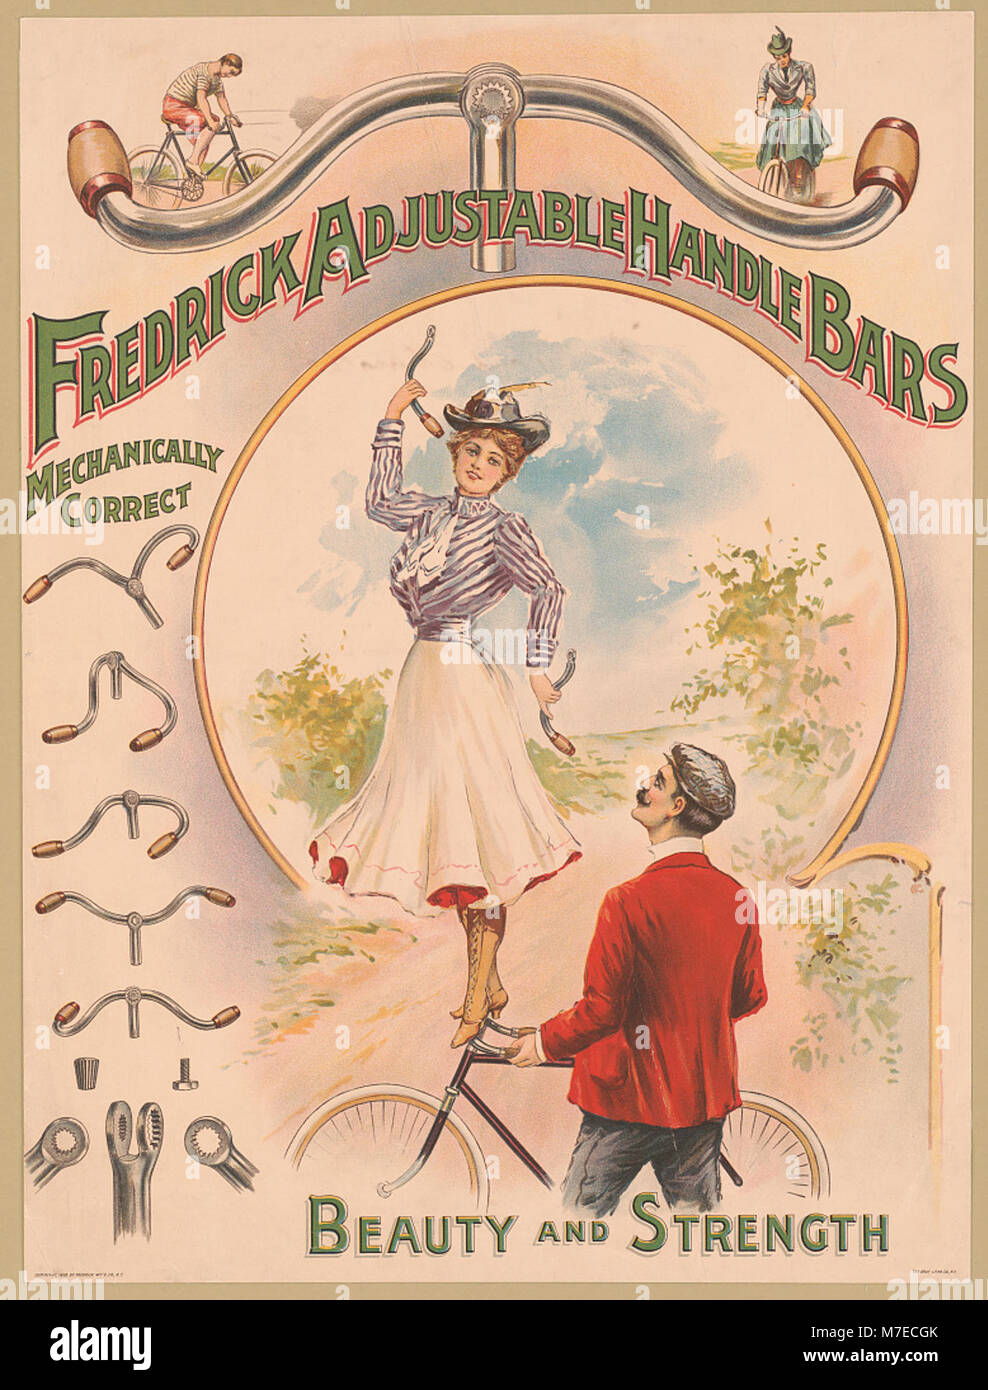 Frederick adjustable handle bars, mechanically correct, beauty and strength LCCN2003688779 Stock Photo